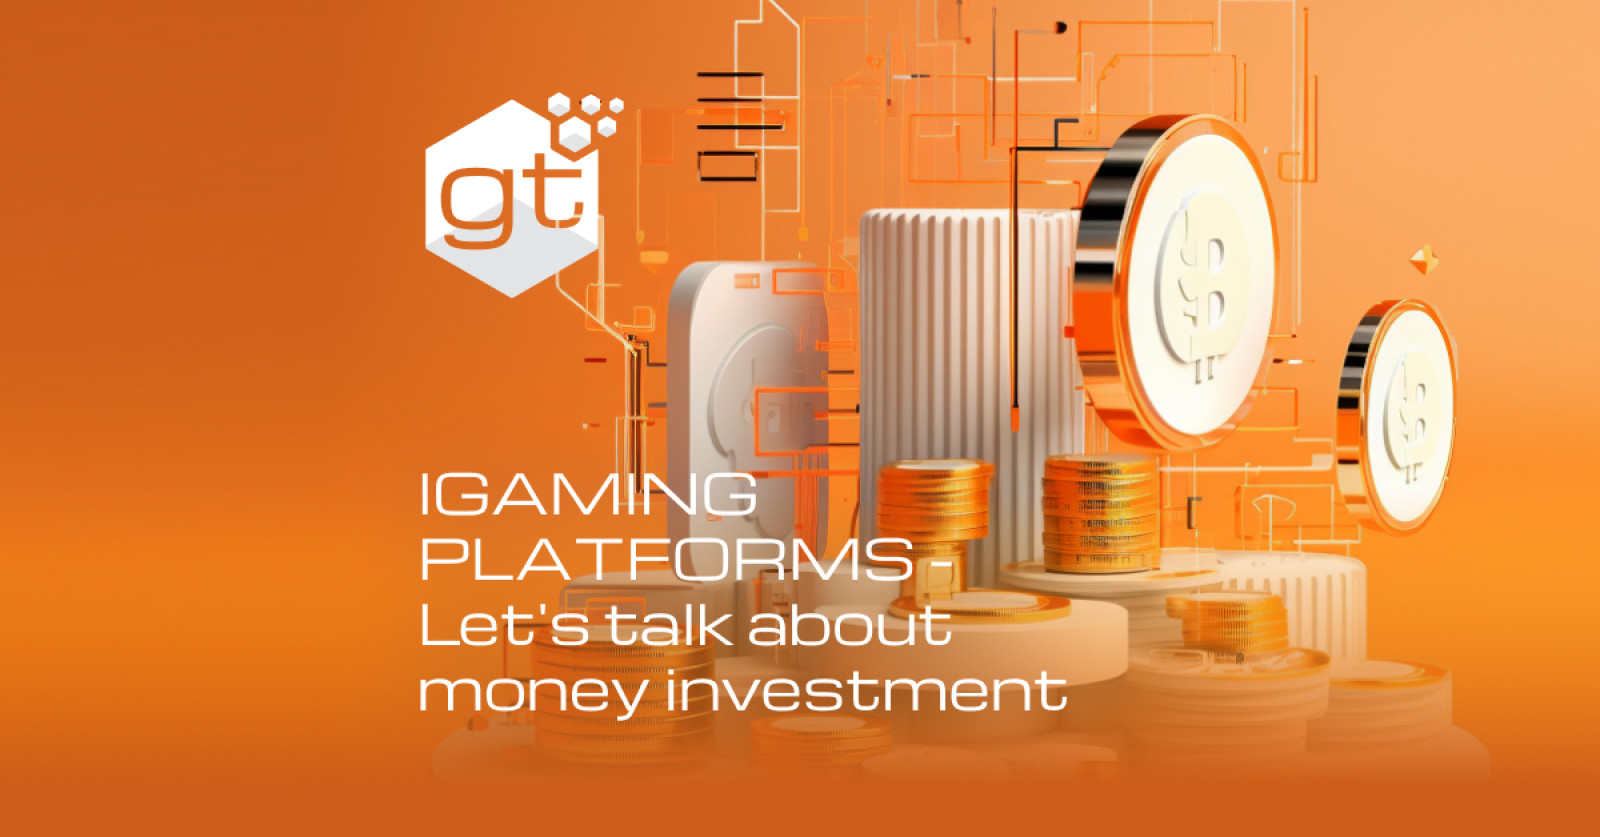 Money investment in iGaming platforms - let’s have a discussion